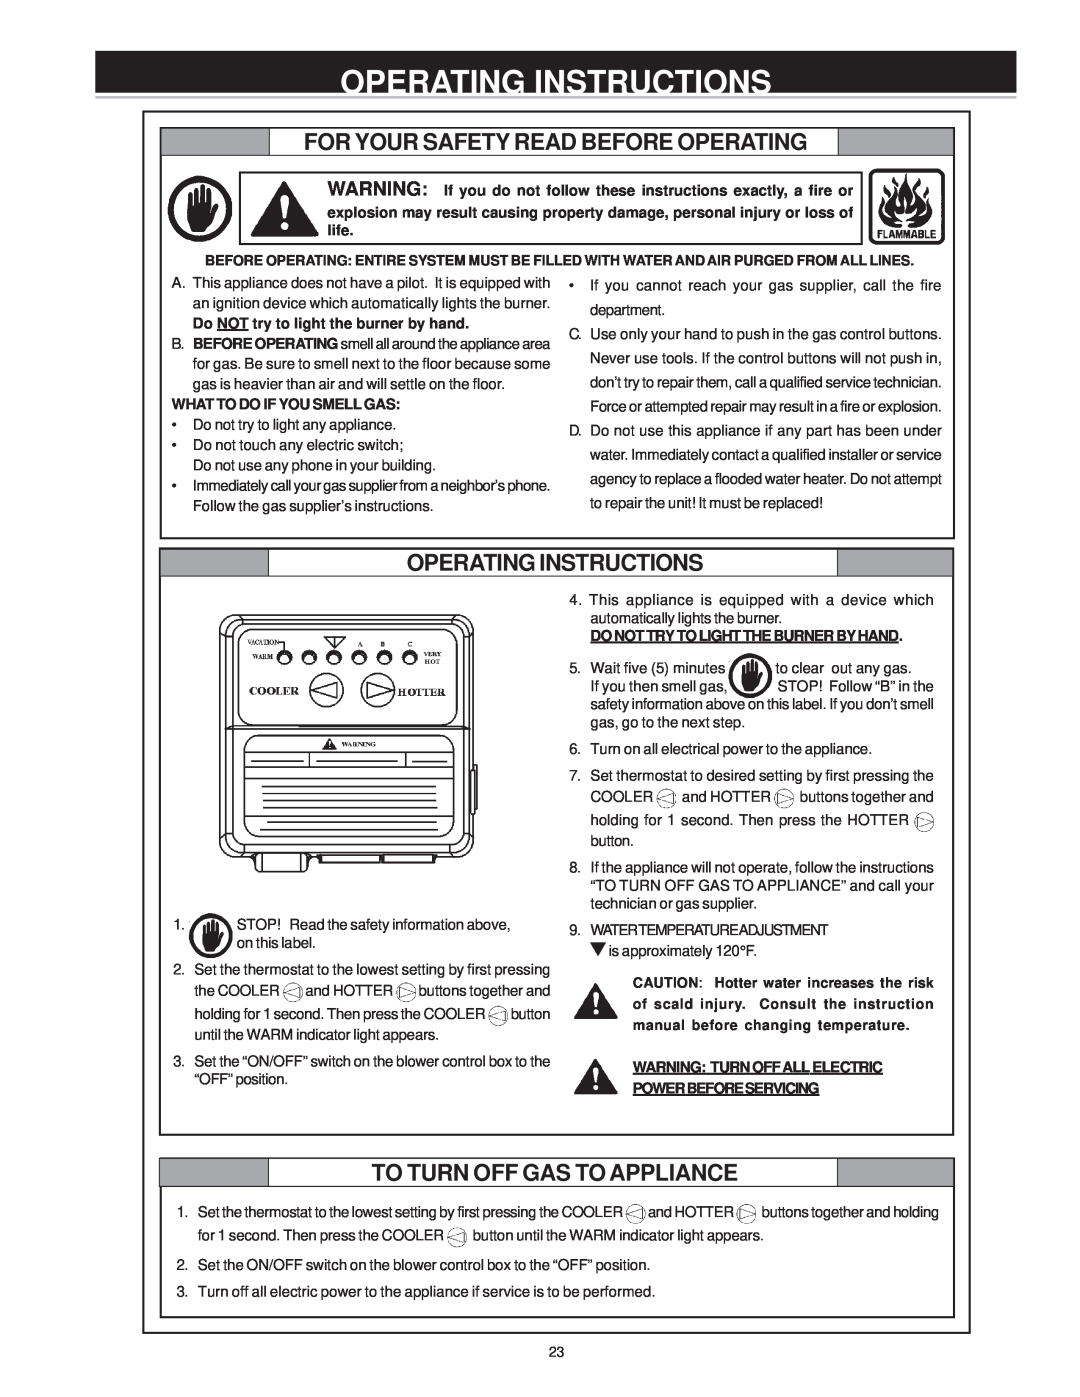 Maytag HVP41240PCGA manual Operating Instructions, For Your Safety Read Before Operating, To Turn Off Gas To Appliance 